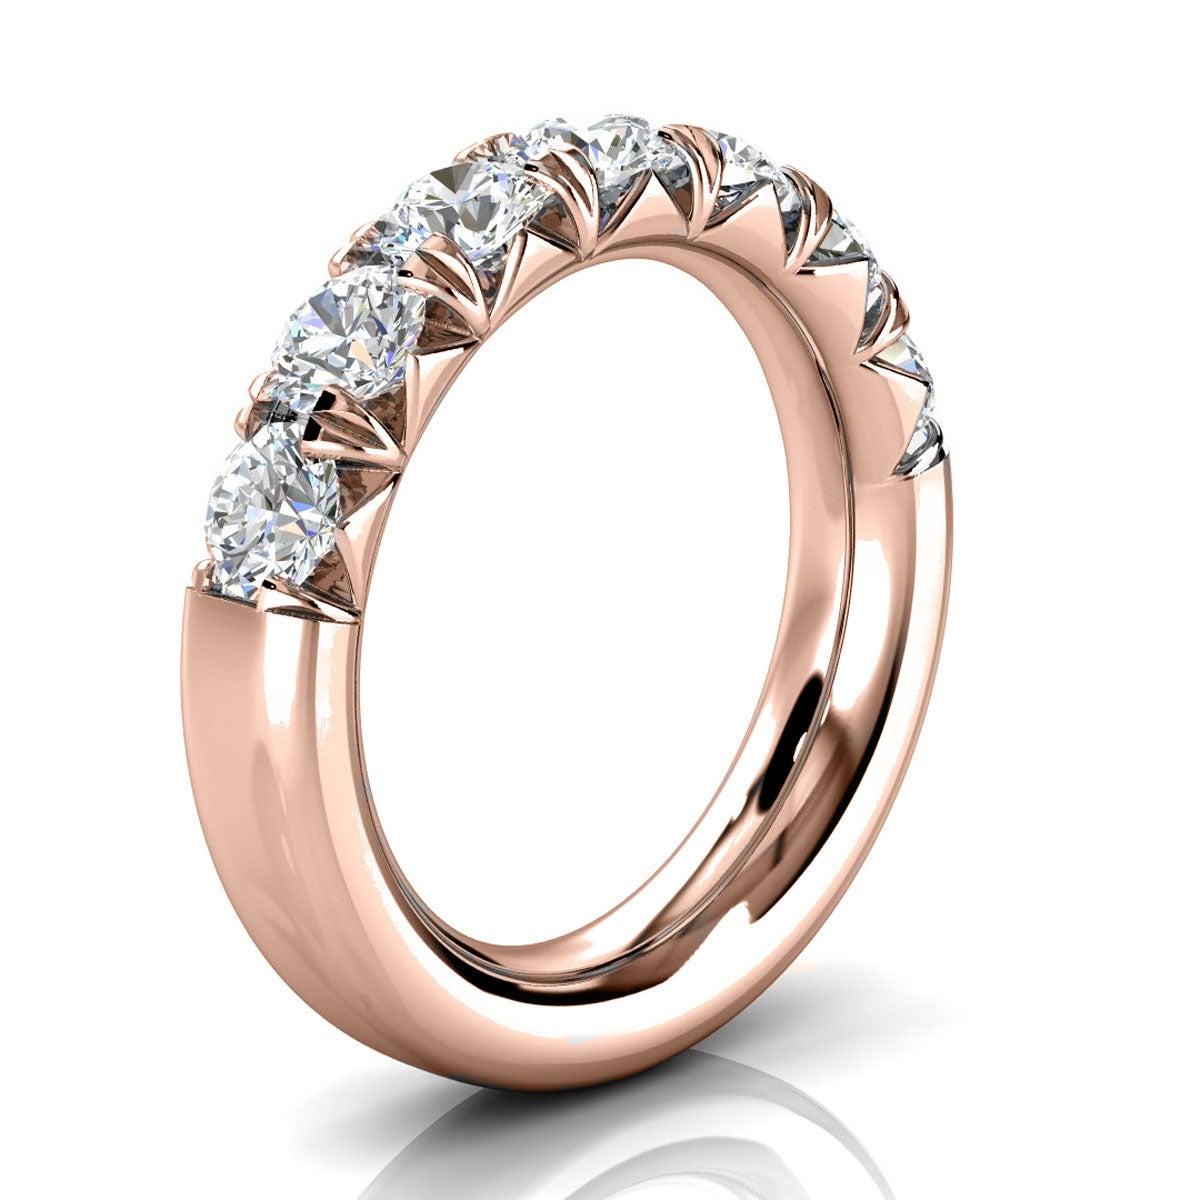 For Sale:  14k Rose Gold Voyage French Pave Diamond Ring '2 Ct. Tw' 2